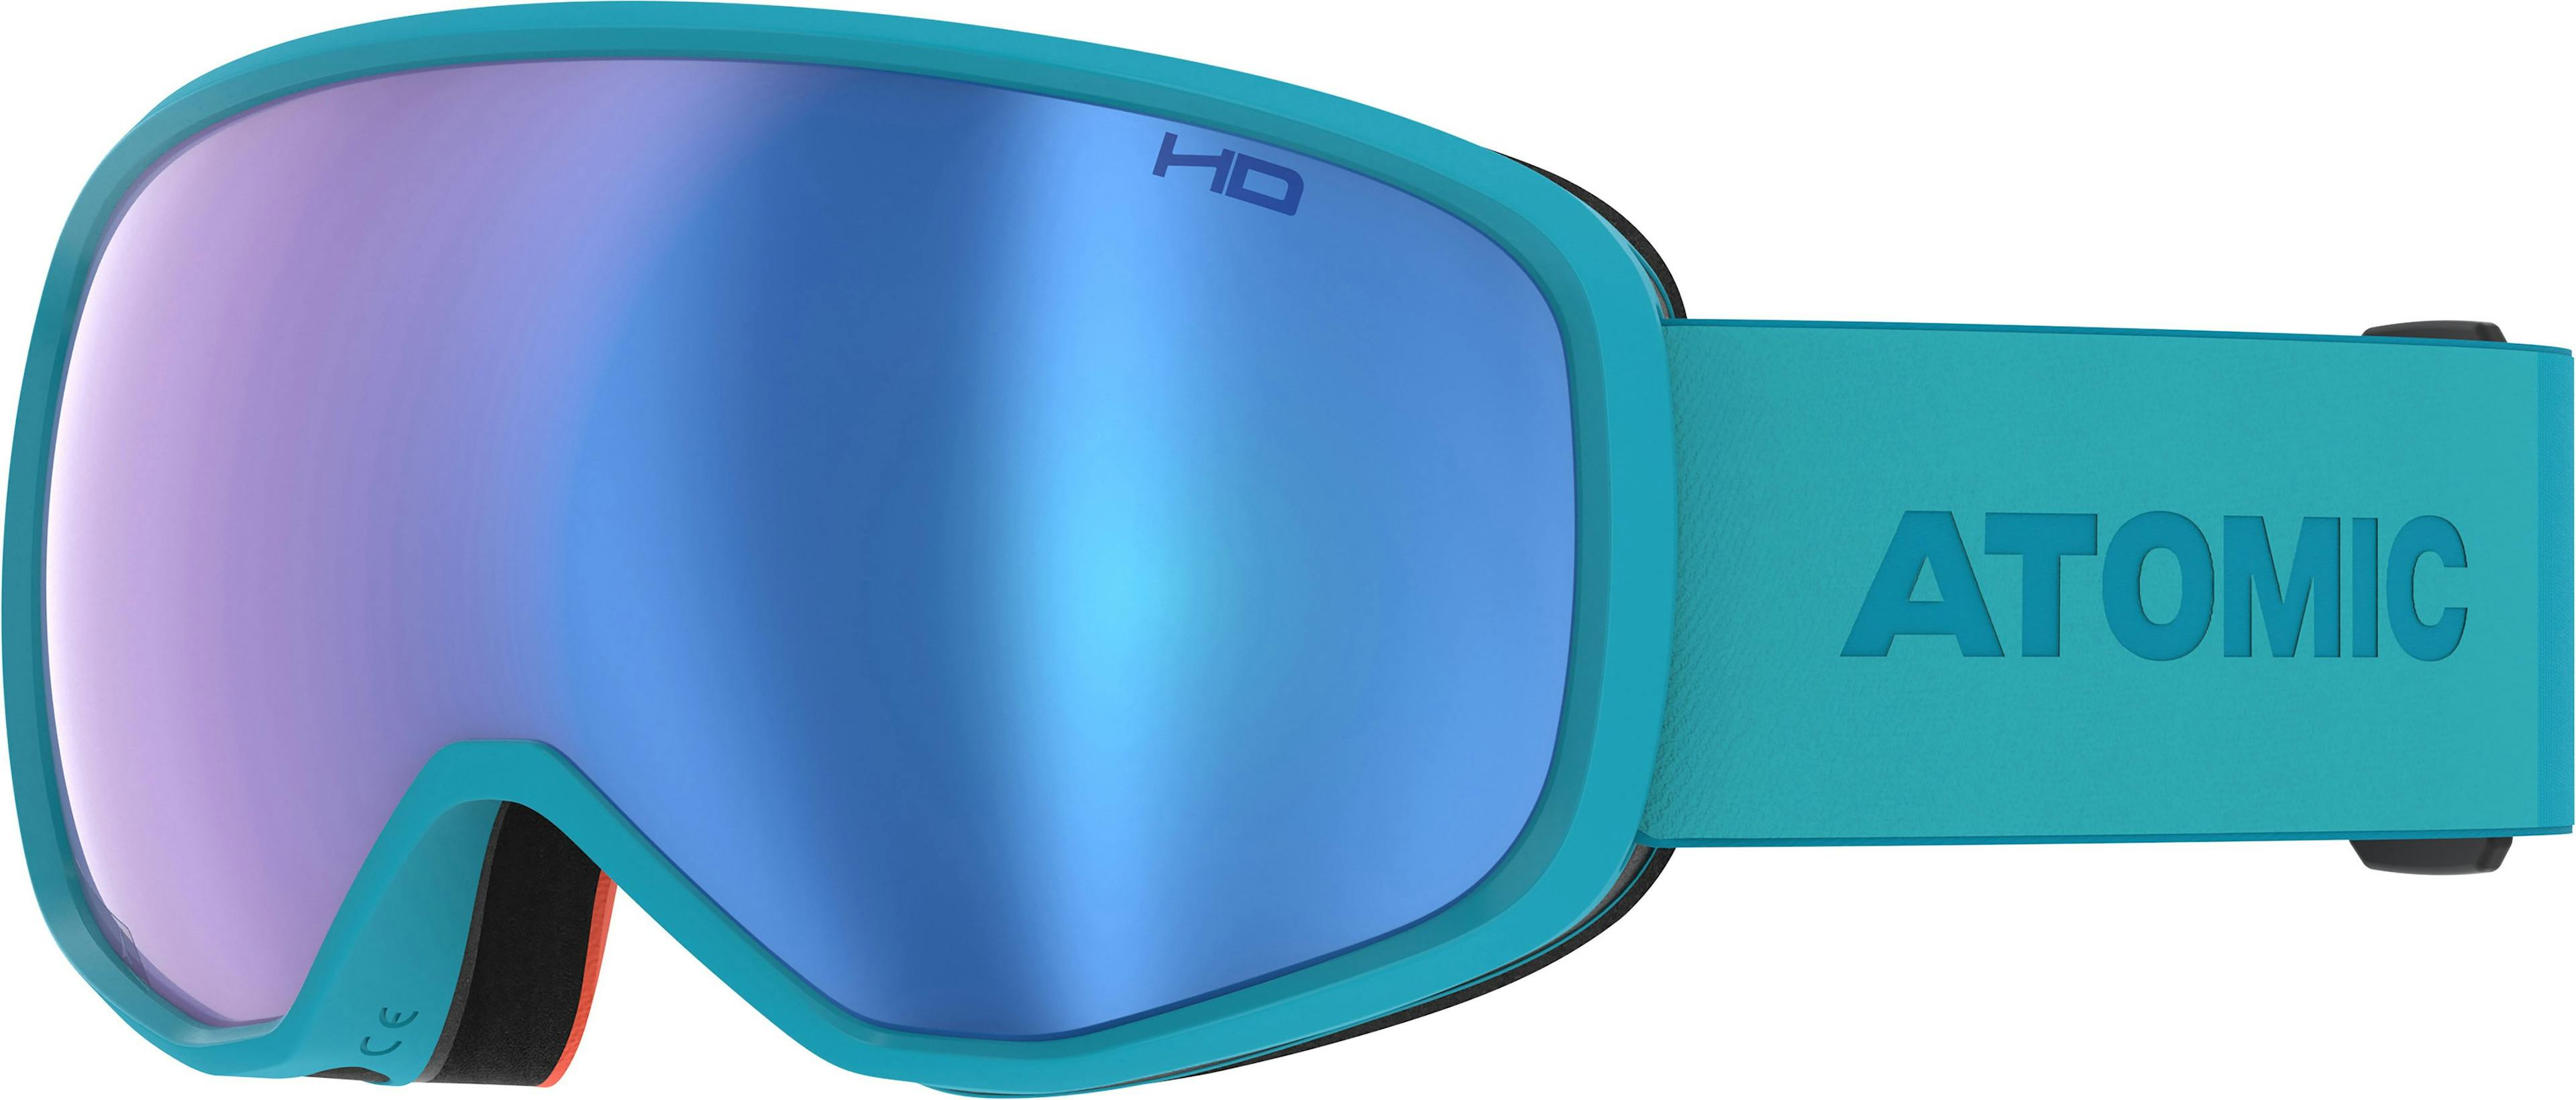 Product image for Revent HD Goggles